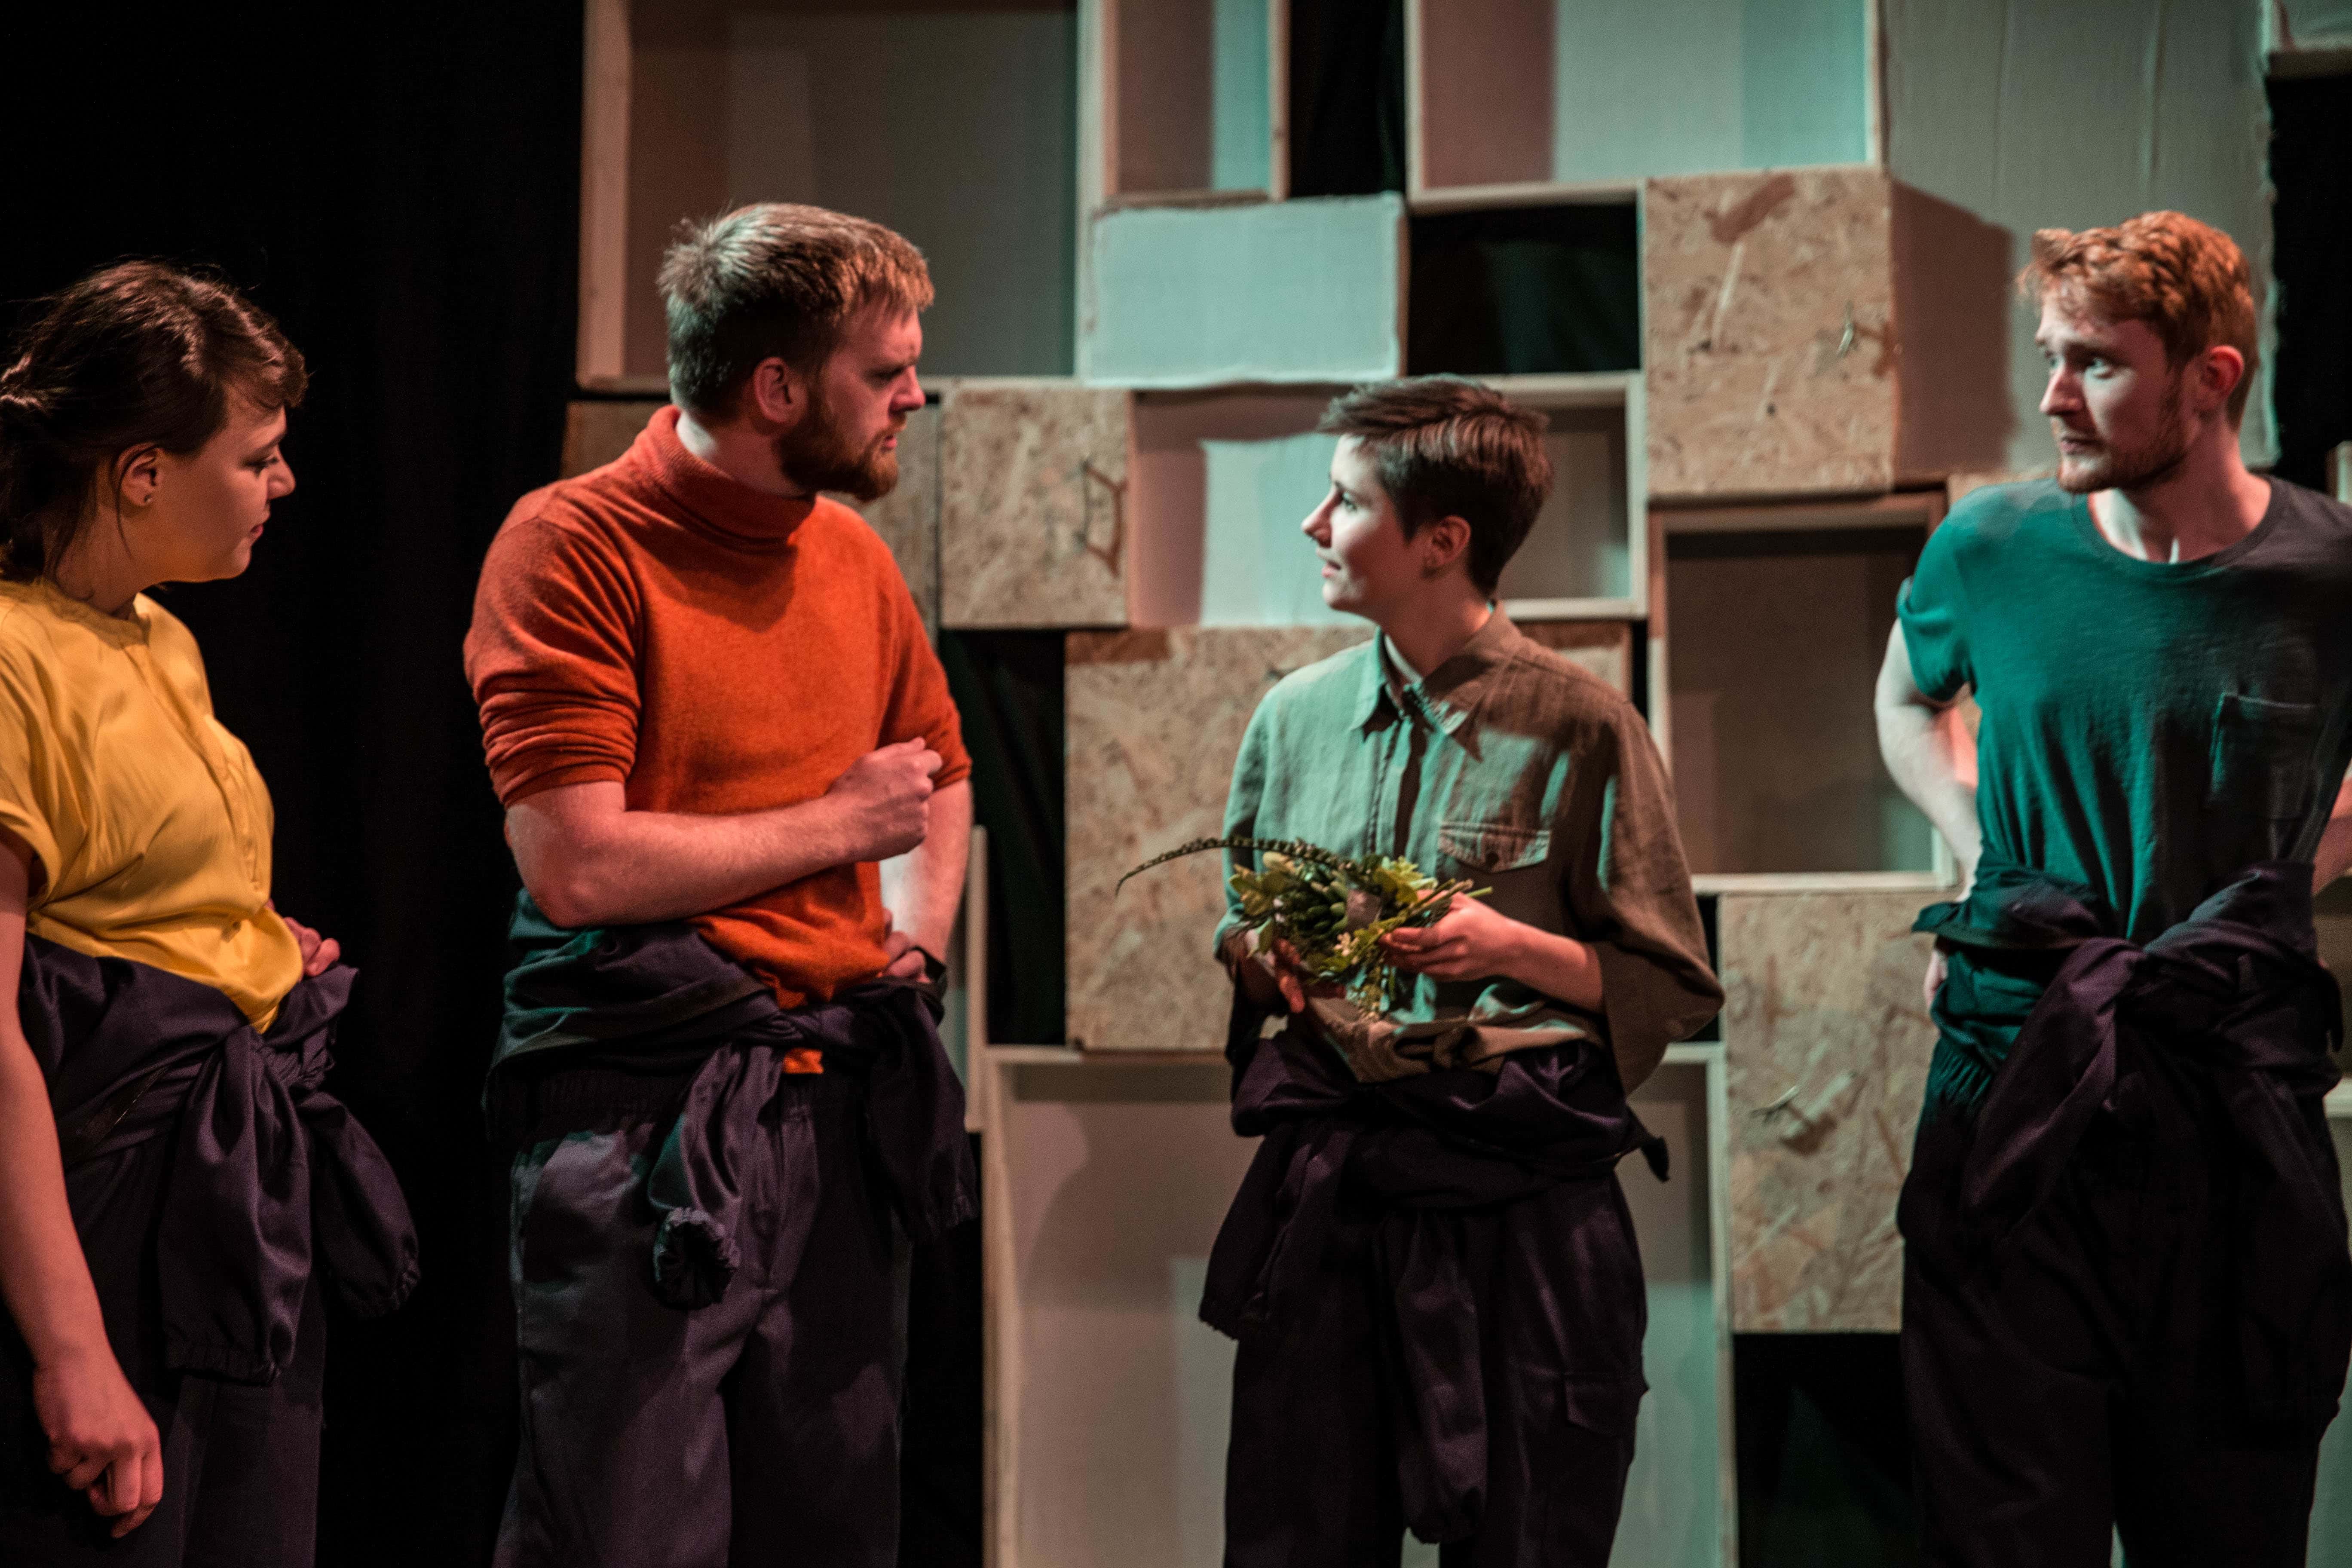 Picture from the play Å eie noen that shows a gardening group who talks to each other.